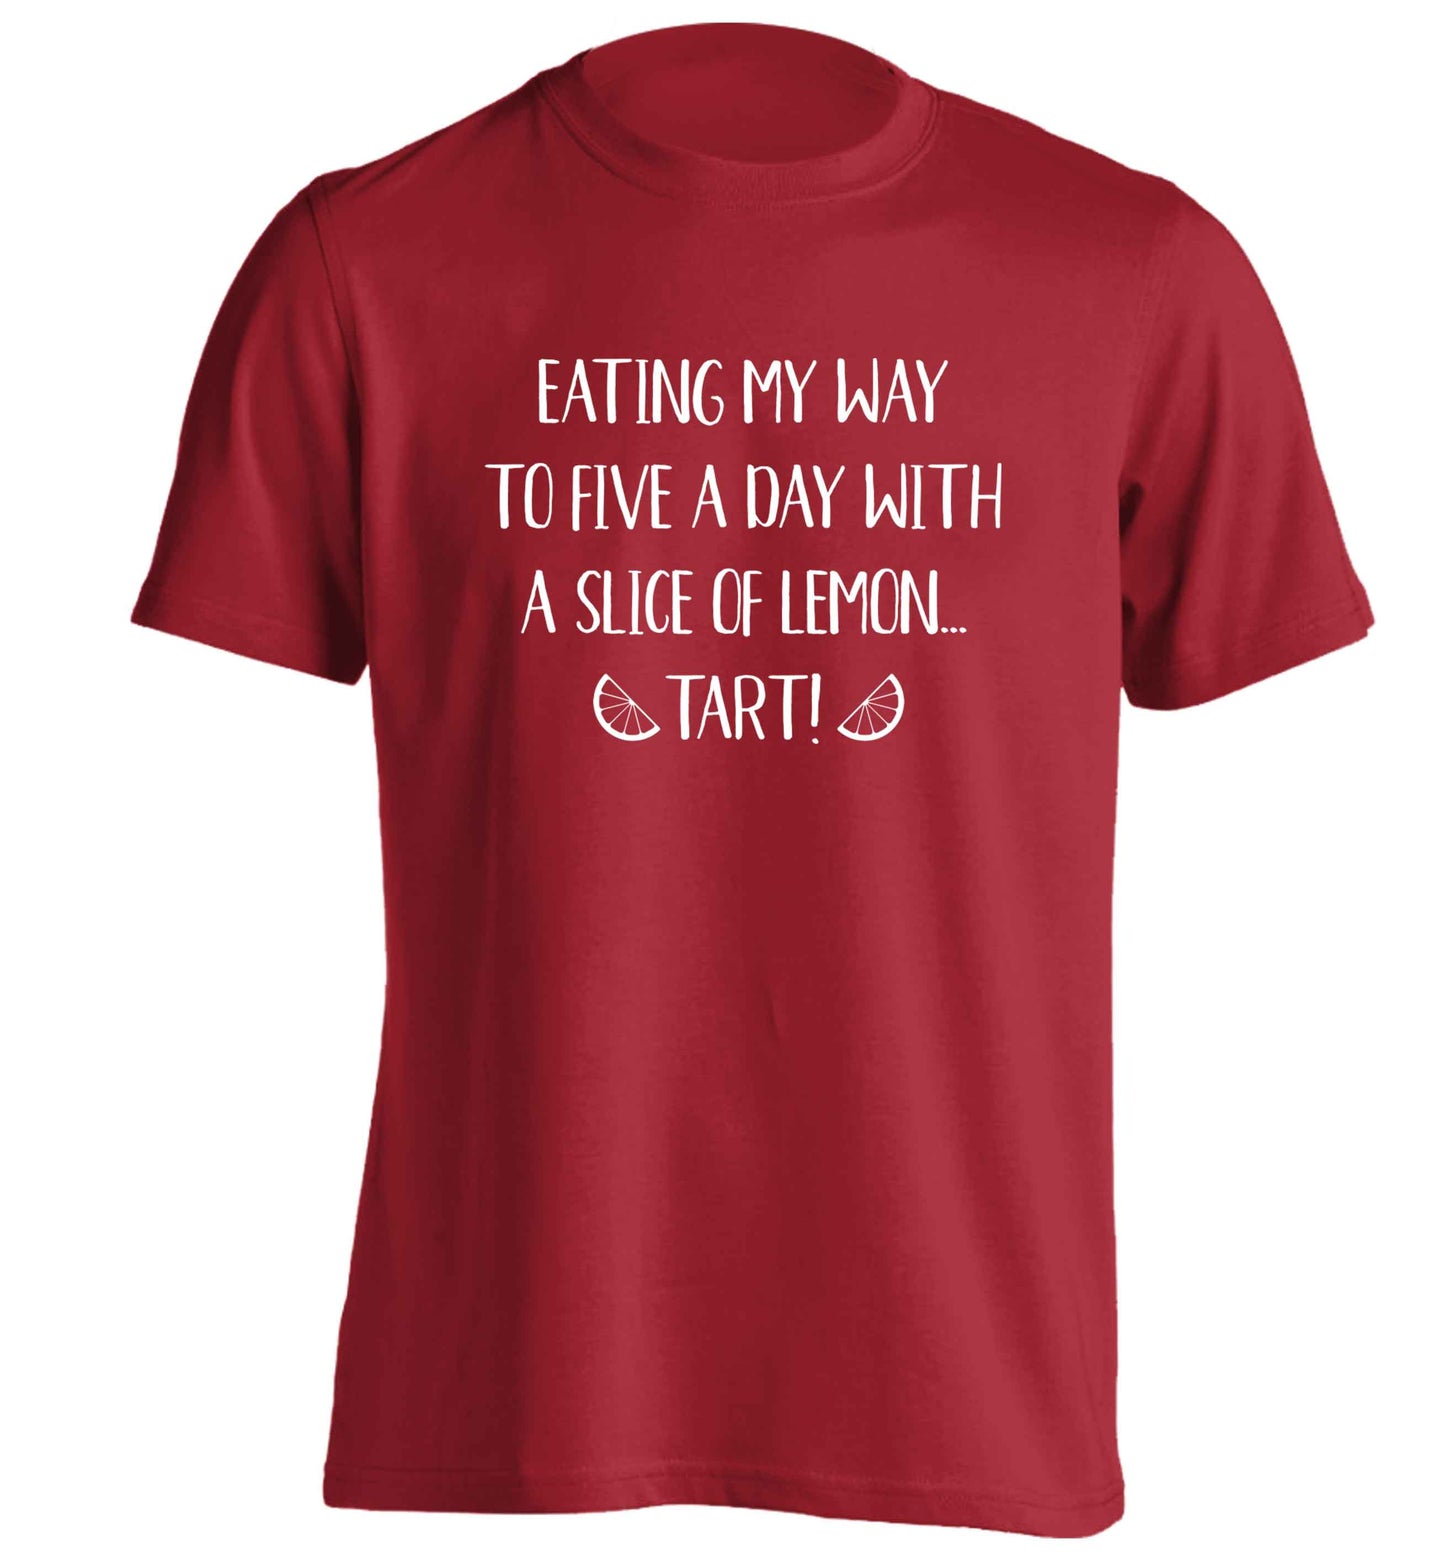 Eating my way to five a day with a slice of lemon tart adults unisex red Tshirt 2XL